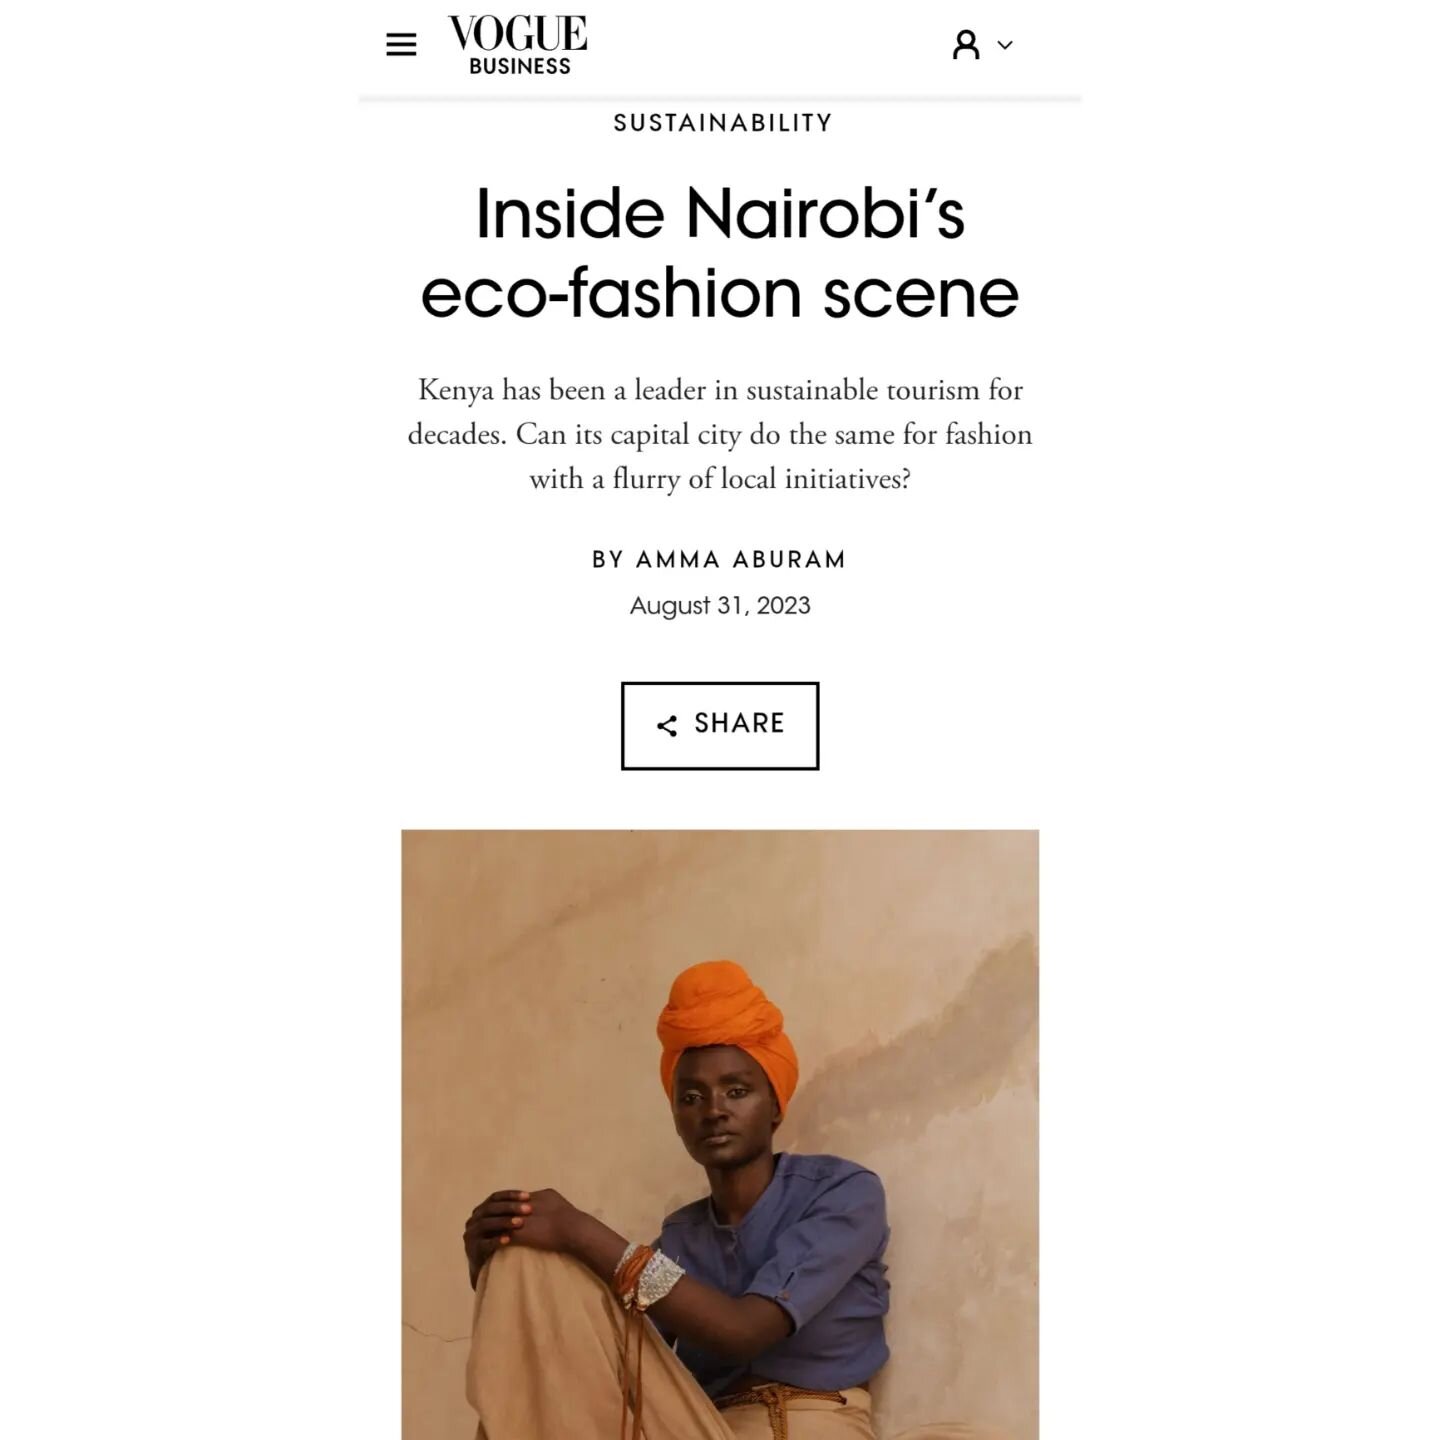 Thrilled to share yet another feature of our Brand on @voguebusiness 🥳 Thank you Amma of @styleand.sustain for recognizing Maisha's journey towards sustainability. 🌹

Fun fact, while sustainability is now central to our brand, it did not start that